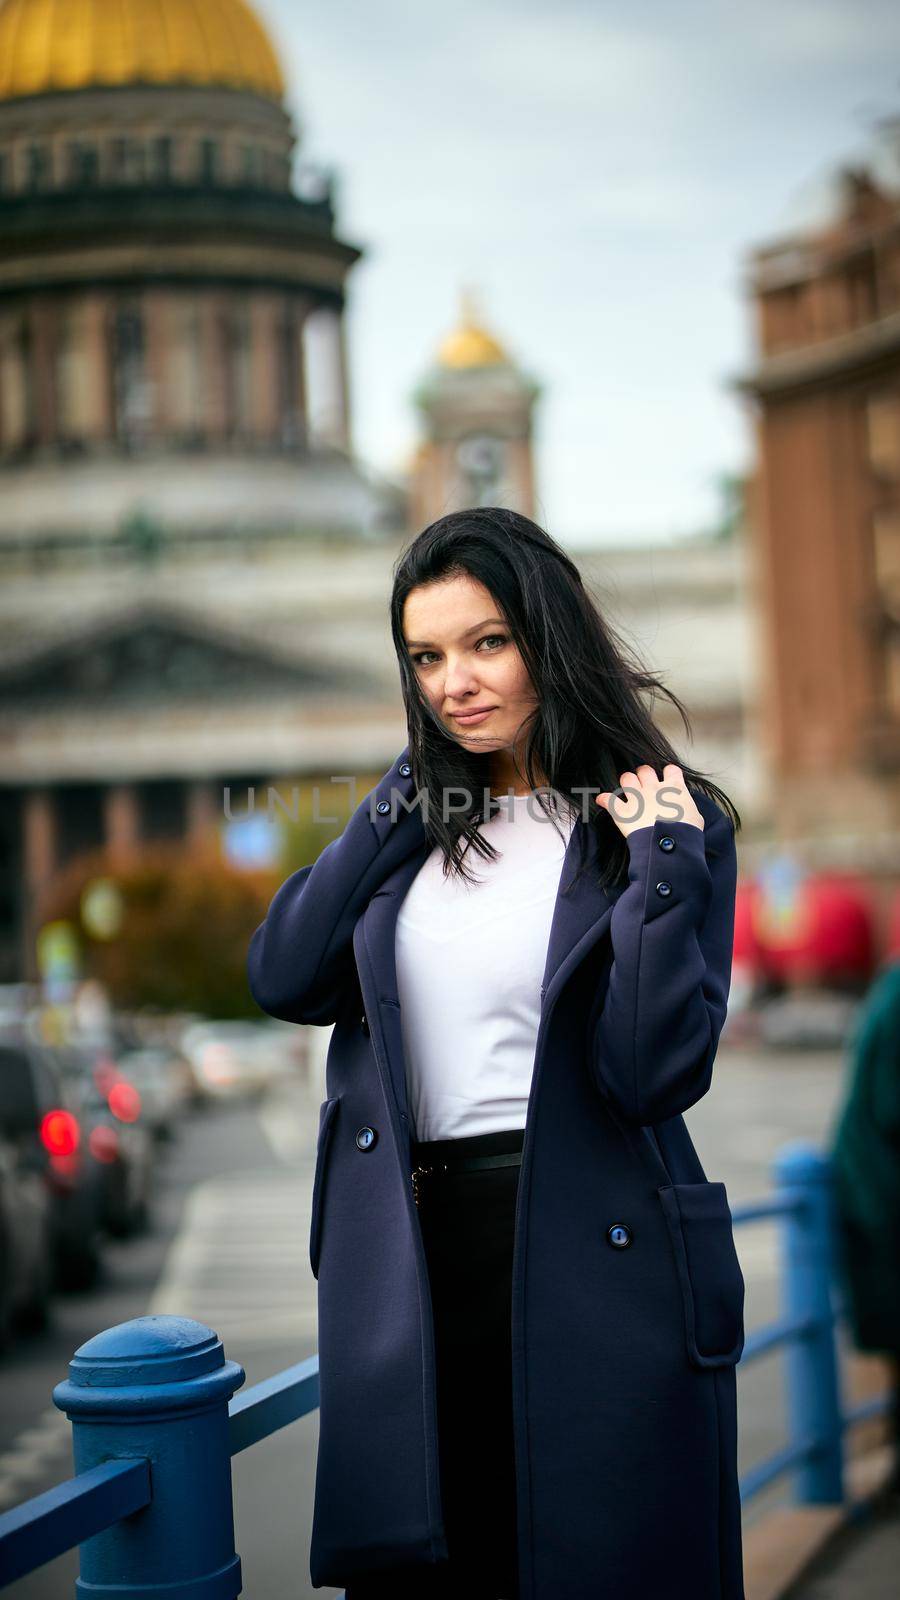 Charming thoughtful fashionably dressed woman with long dark hair travels through Europe, standing in city center of St. Petersburg, thoughtful woman with long dark hair wanders alone by NataBene